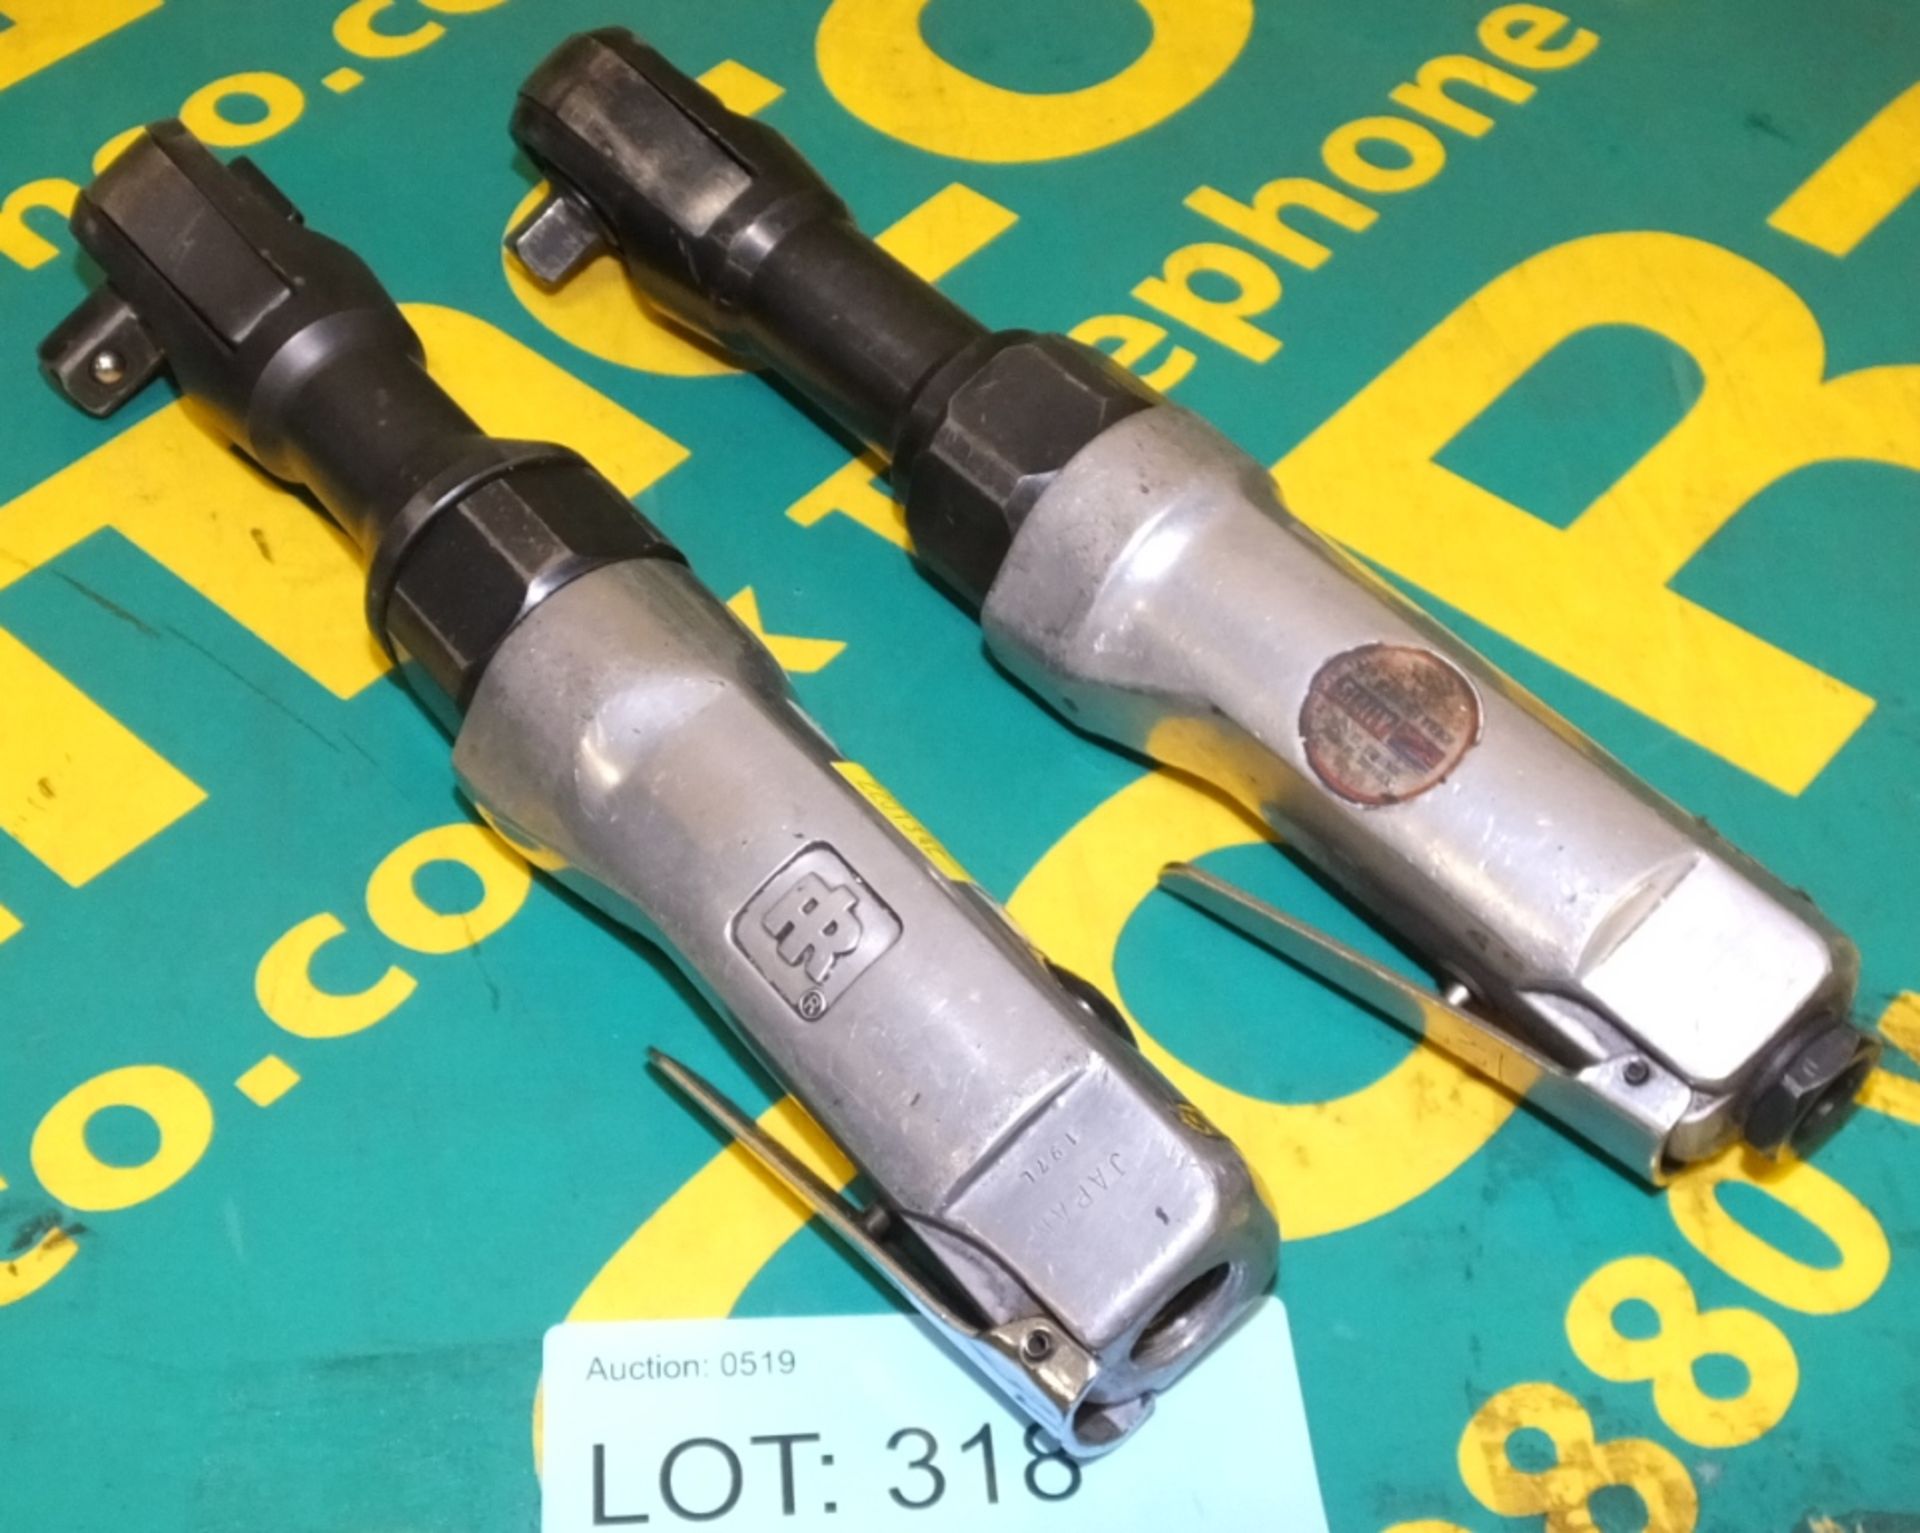 2x Pneumatic Impact Wrenches